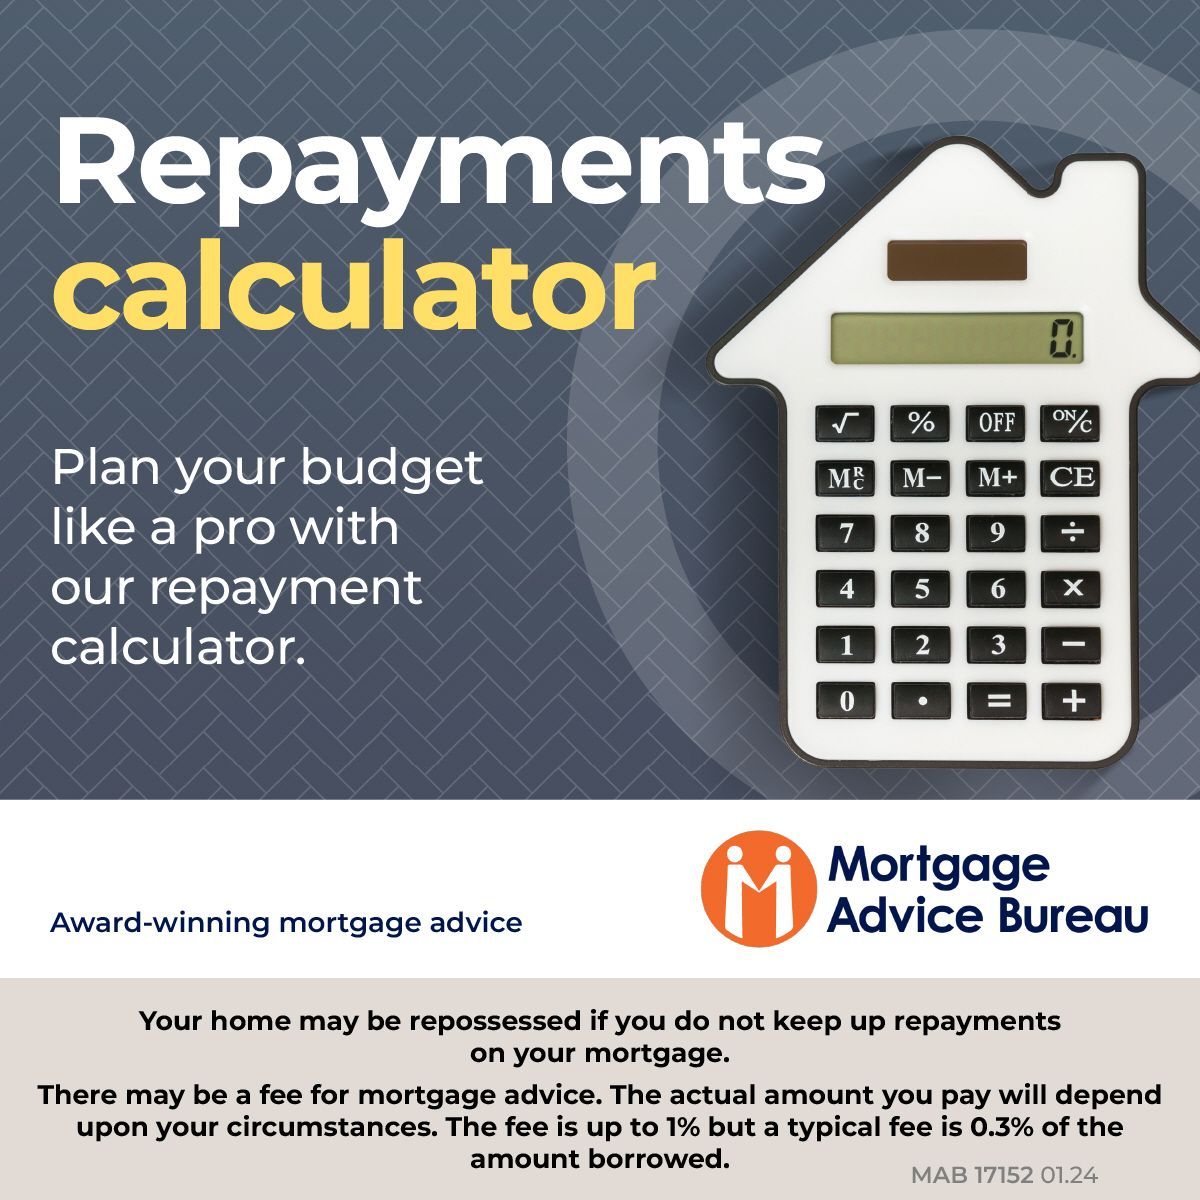 By entering a few key details in our repayment calculator , we can provide you with an indicative value: buff.ly/3vZzGyZ 
#mortgageadvice #mortgagehelp #mortgagebroker #repaymentcalculator